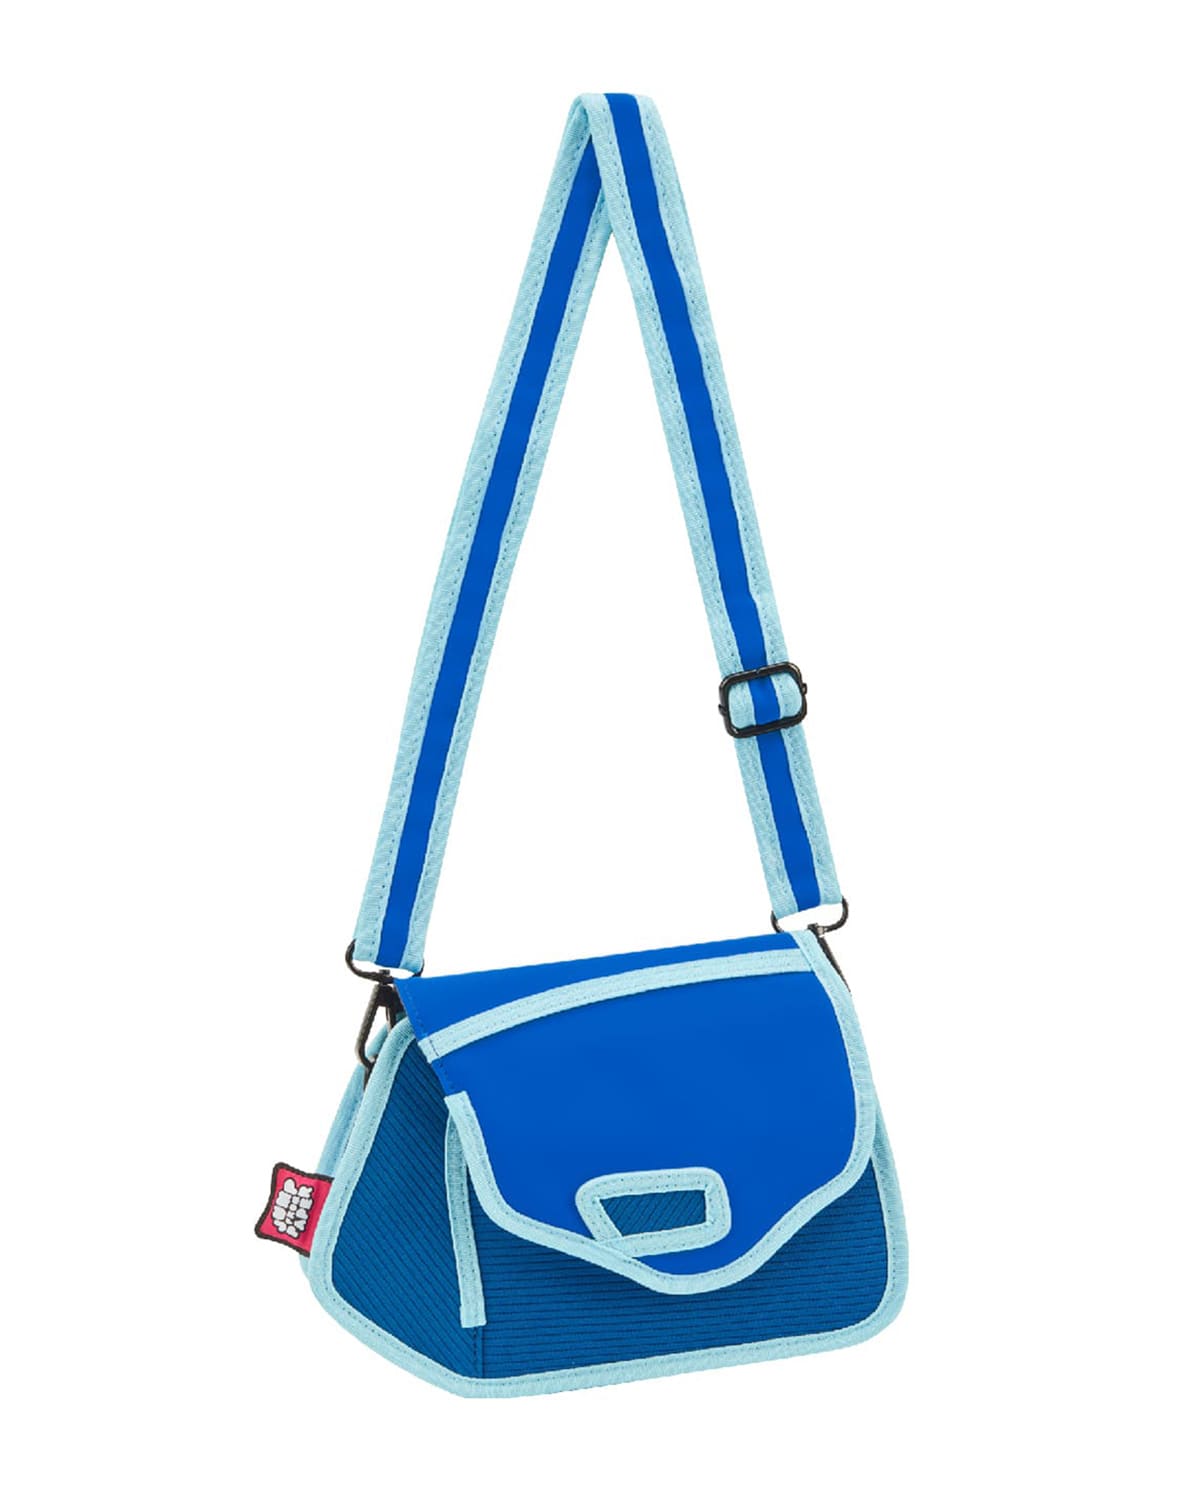 Jump from Paper Kid's Clicky Shoulder Bag